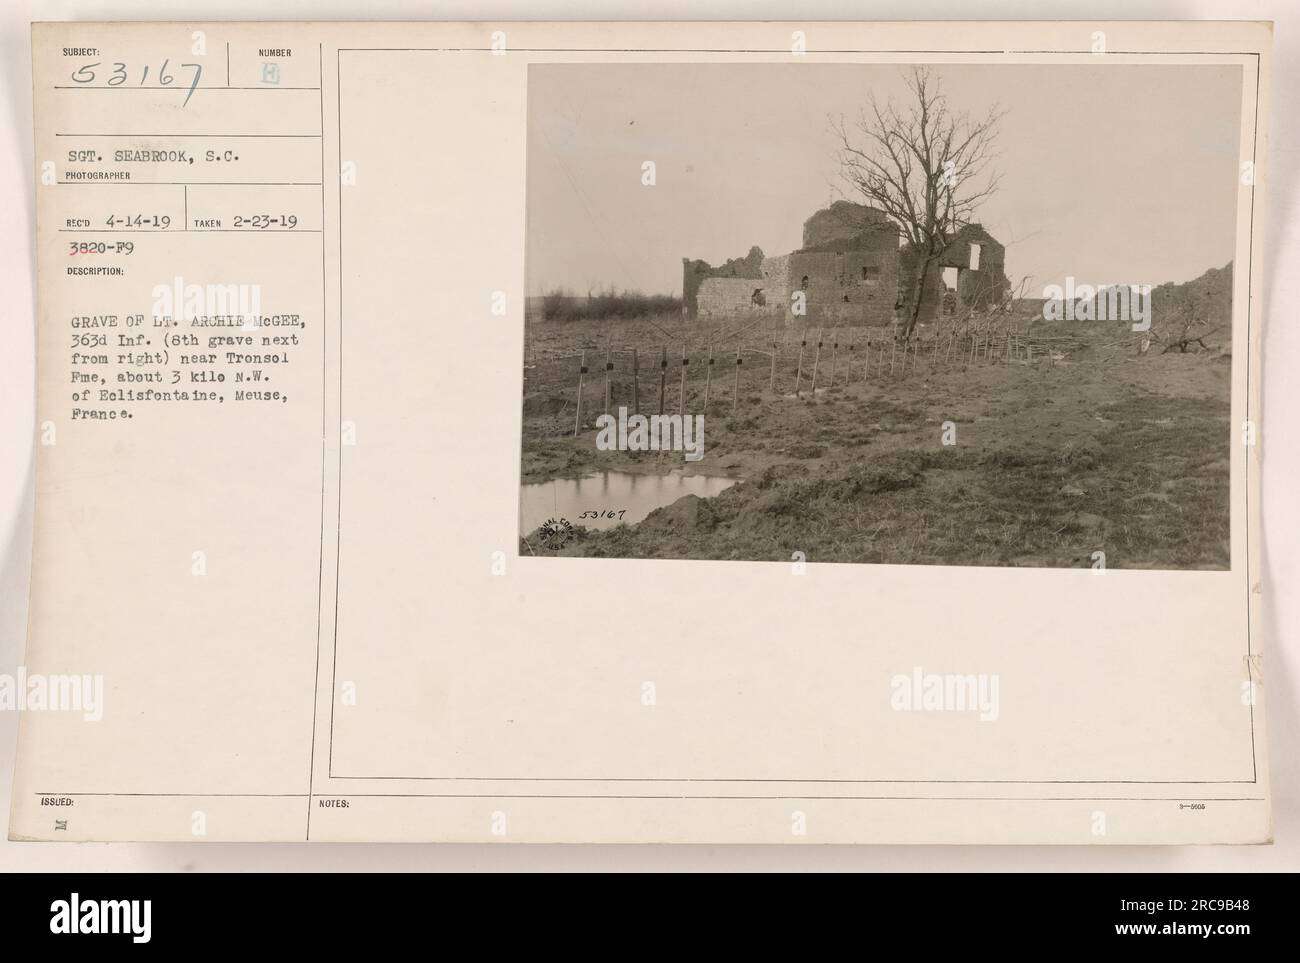 Grave of Lt. Archie McGee, 363rd Inf. (8th grave next from right) located near Tronsol Fme, about 3 kilometers northwest of Eclisfontaine, Meuse, France. Photograph taken on February 23, 1919, by Sgt. Seabrook, S.C. Photographer number B RICD 4-14-19. This description is recorded with reference number 3820-79. It was officially issued with three additional notes under the number 53167. Stock Photo